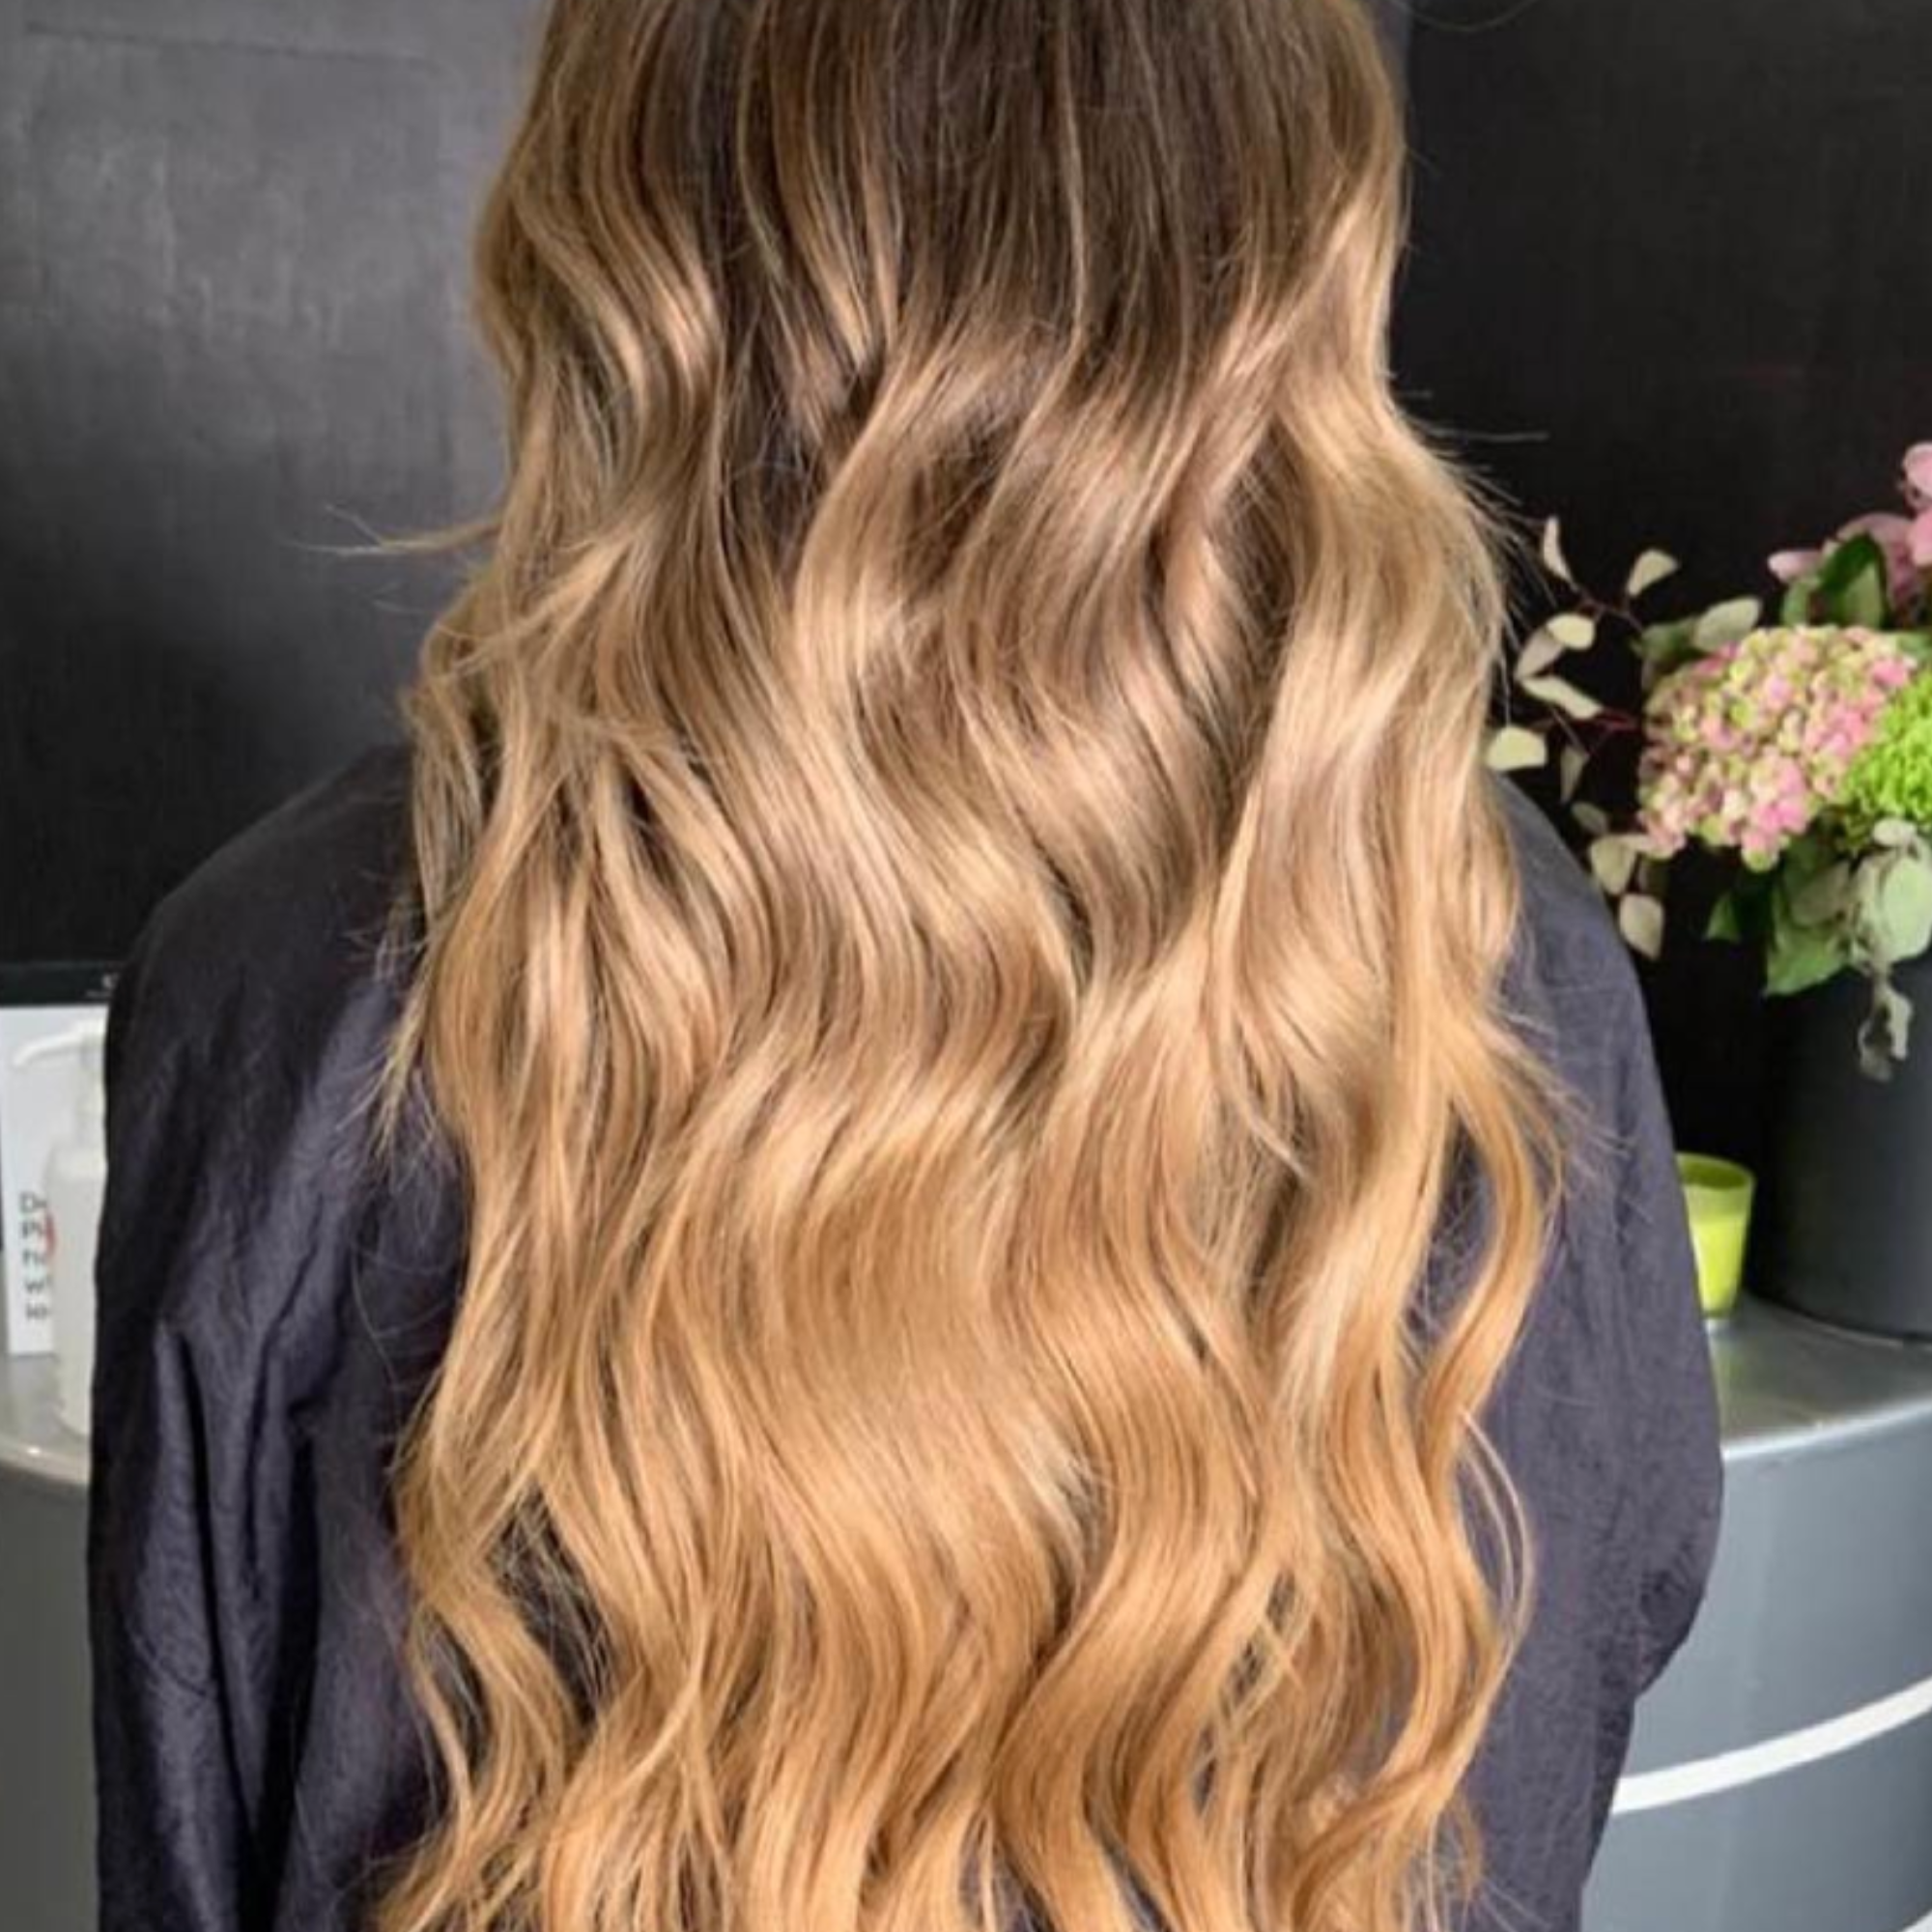 22" Invisible Tape Extensions Rooted Boho